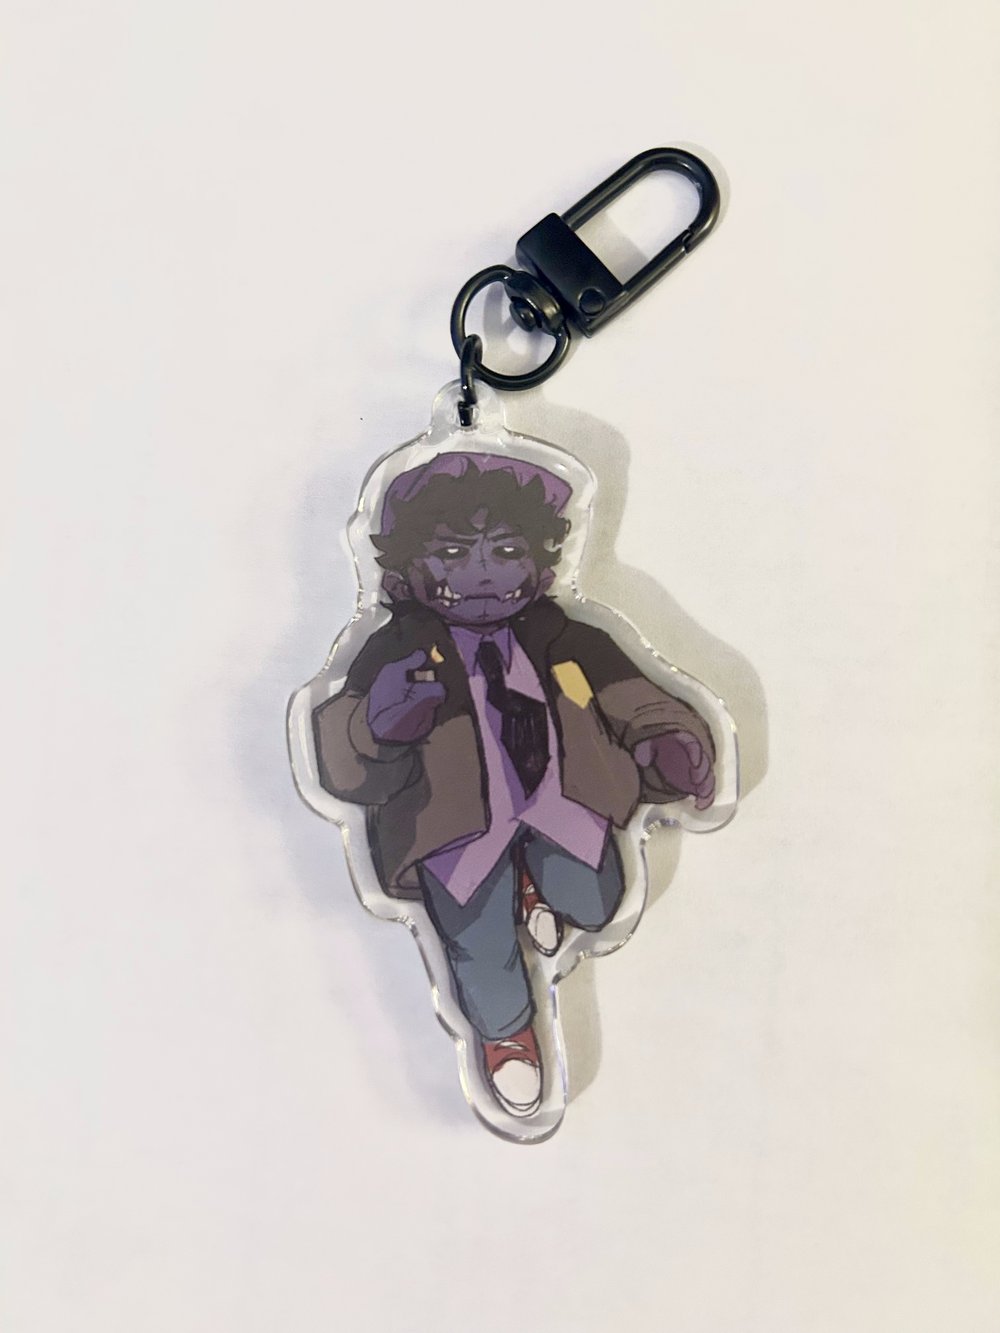 Double Sided Michael Charm